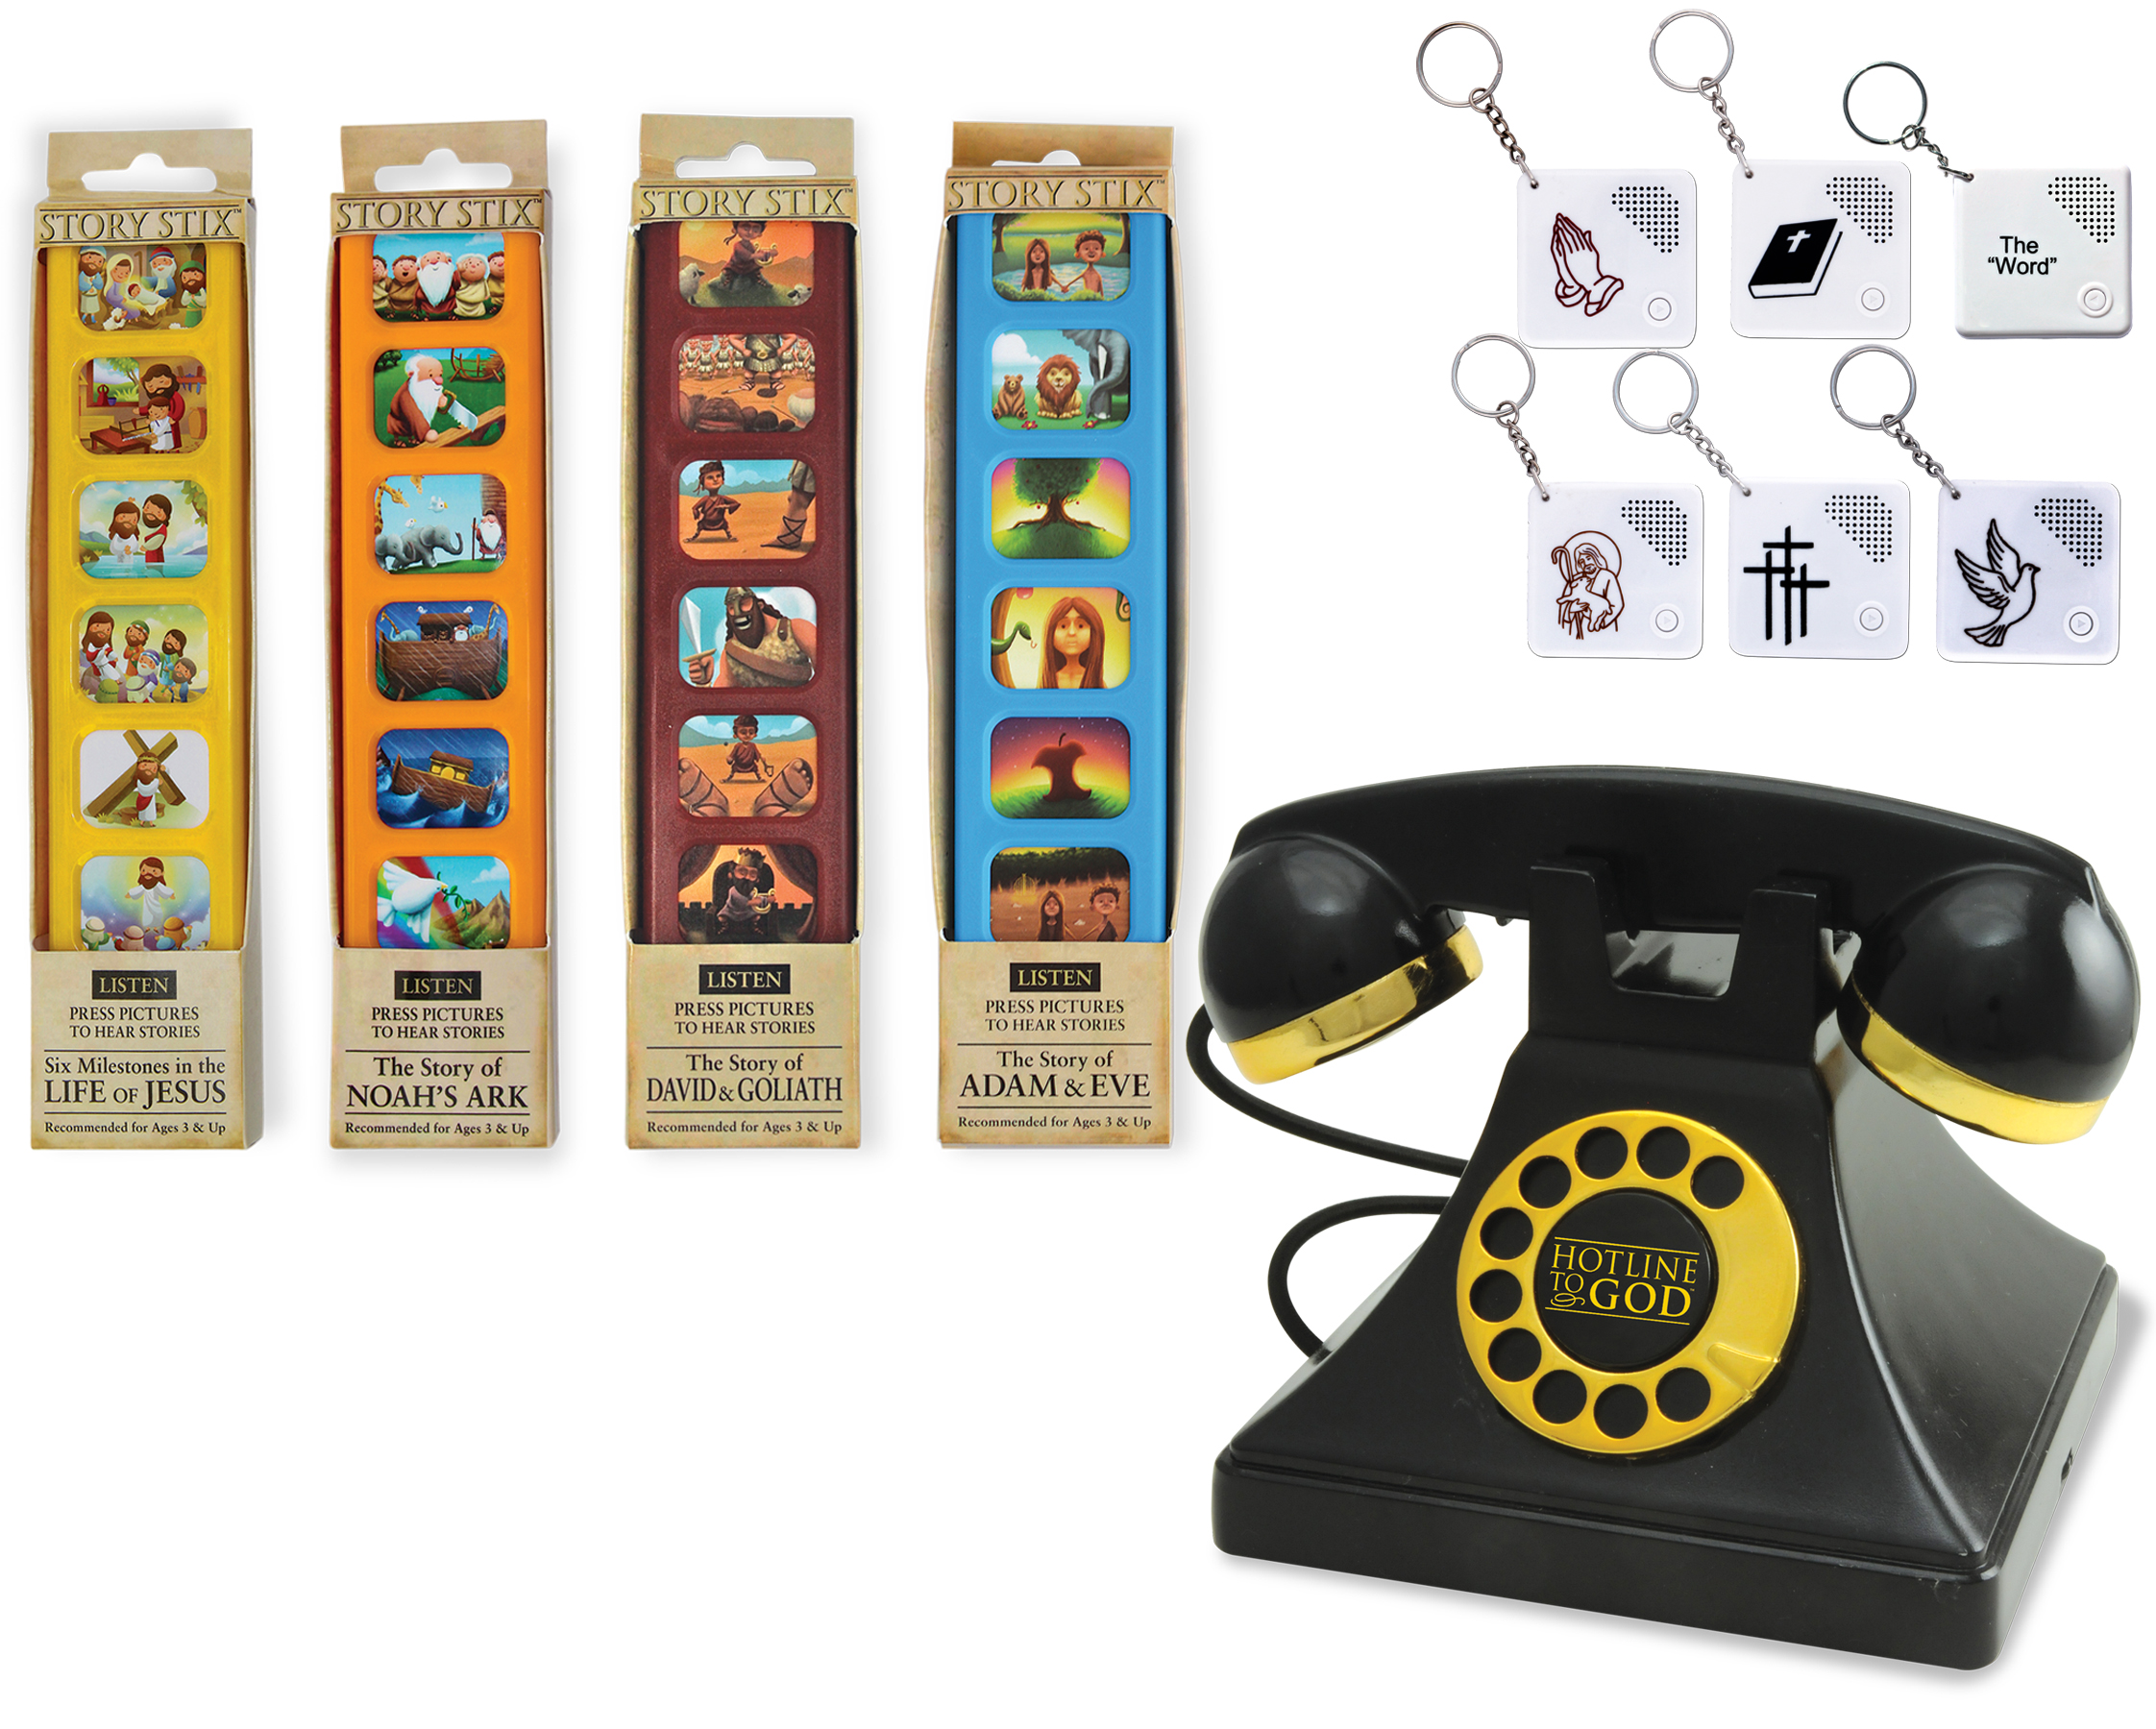 Hotline to God Products